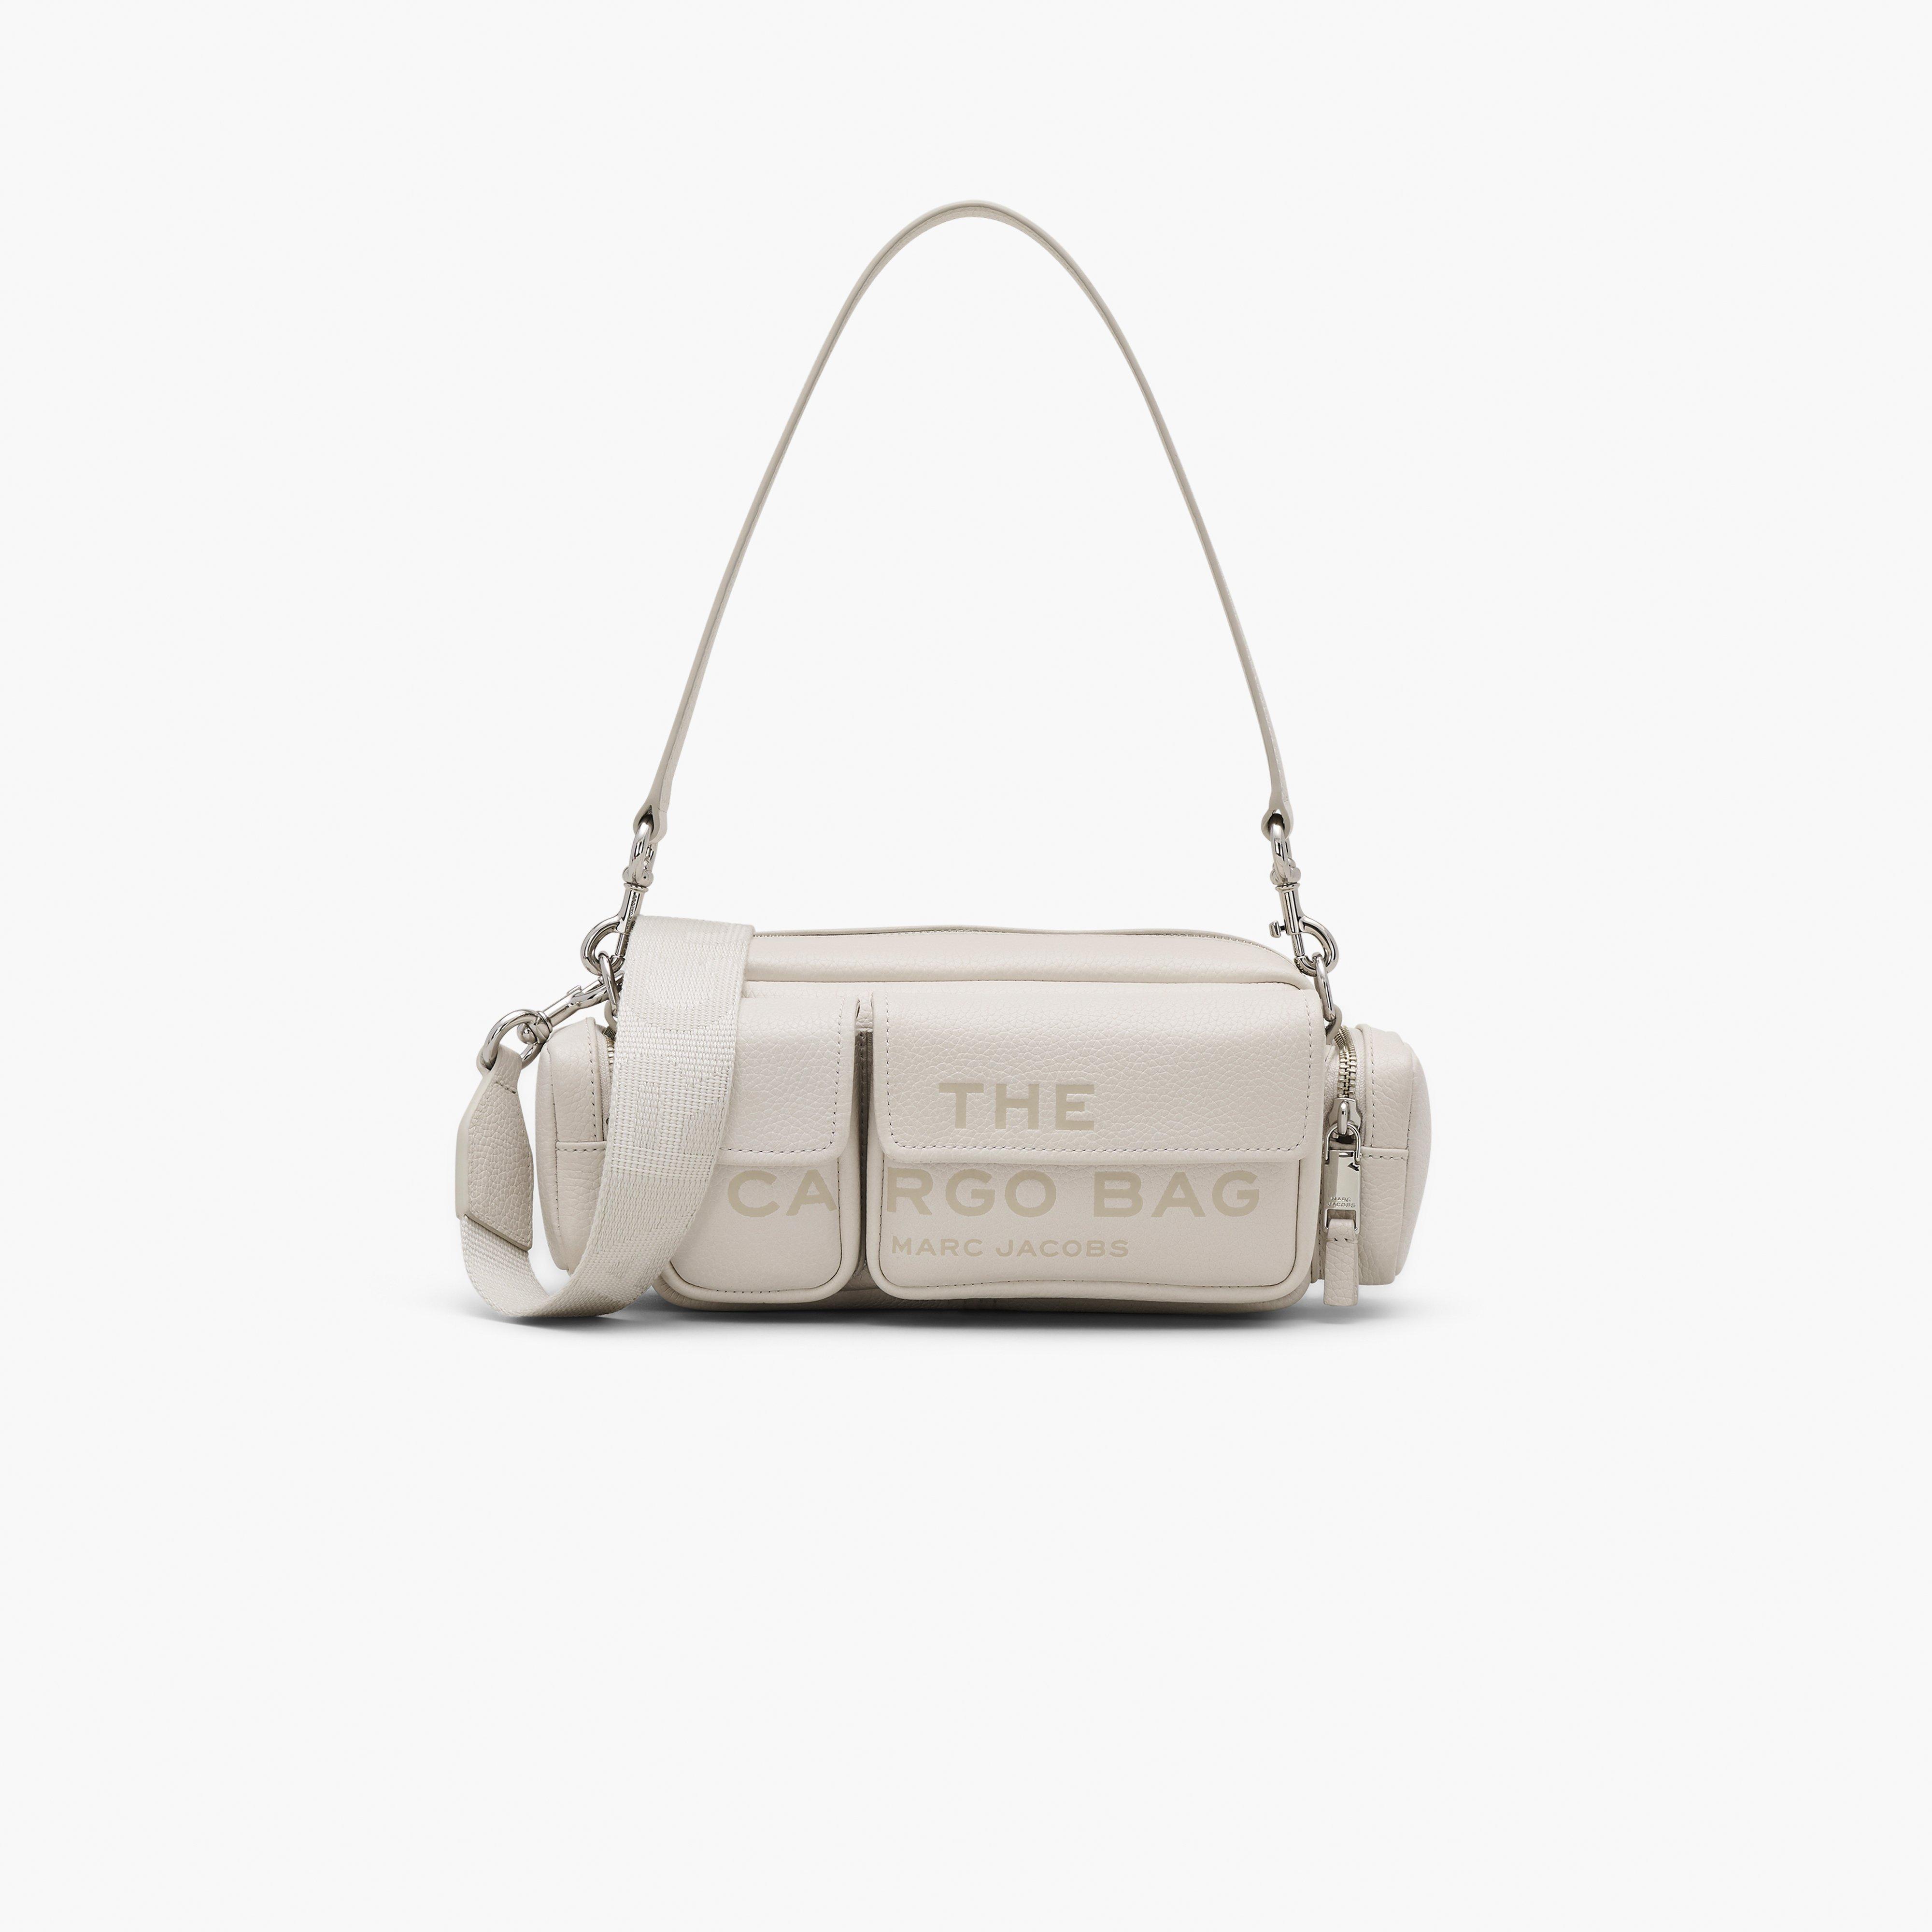 Marc by Marc jacobs The Leather Cargo Bag,COTTON/SILVER